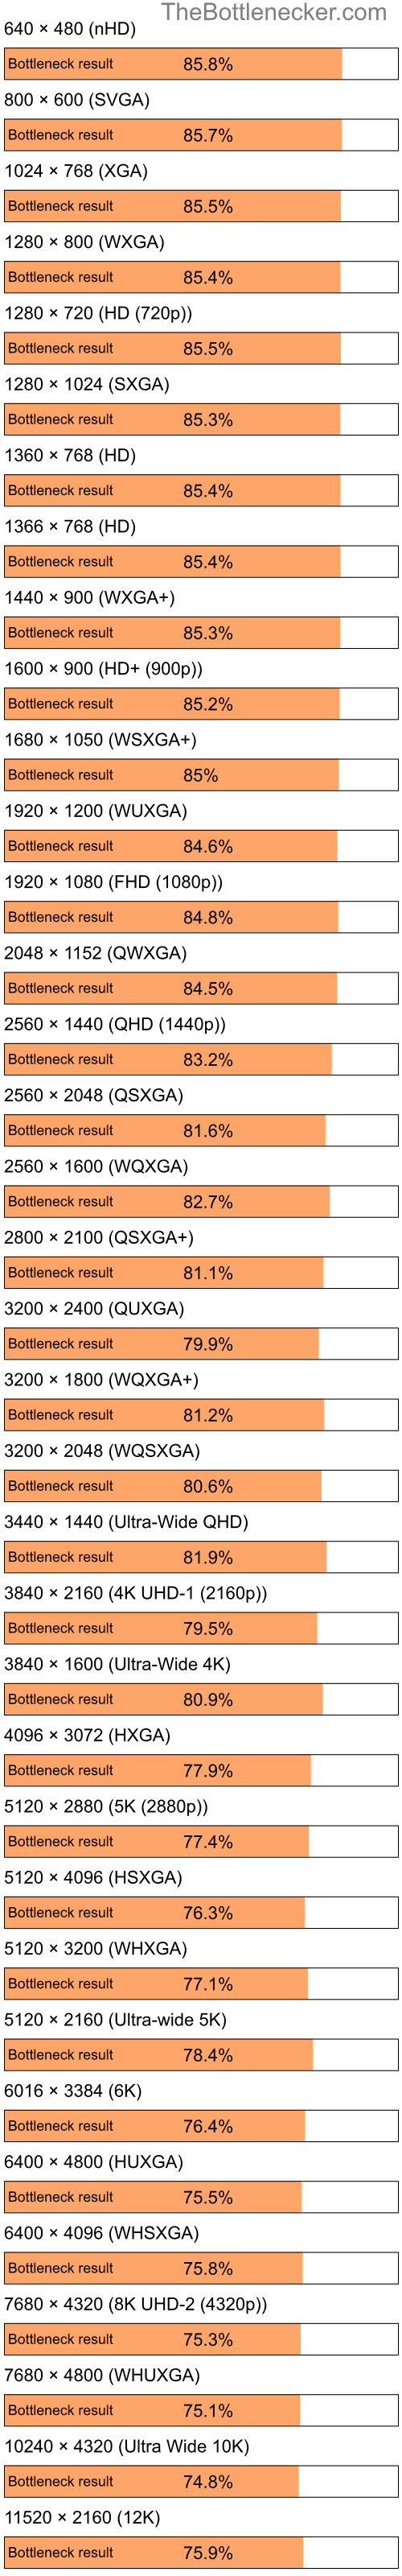 Bottleneck results by resolution for Intel Pentium 4 and NVIDIA GeForce RTX 3080 in Graphic Card Intense Tasks